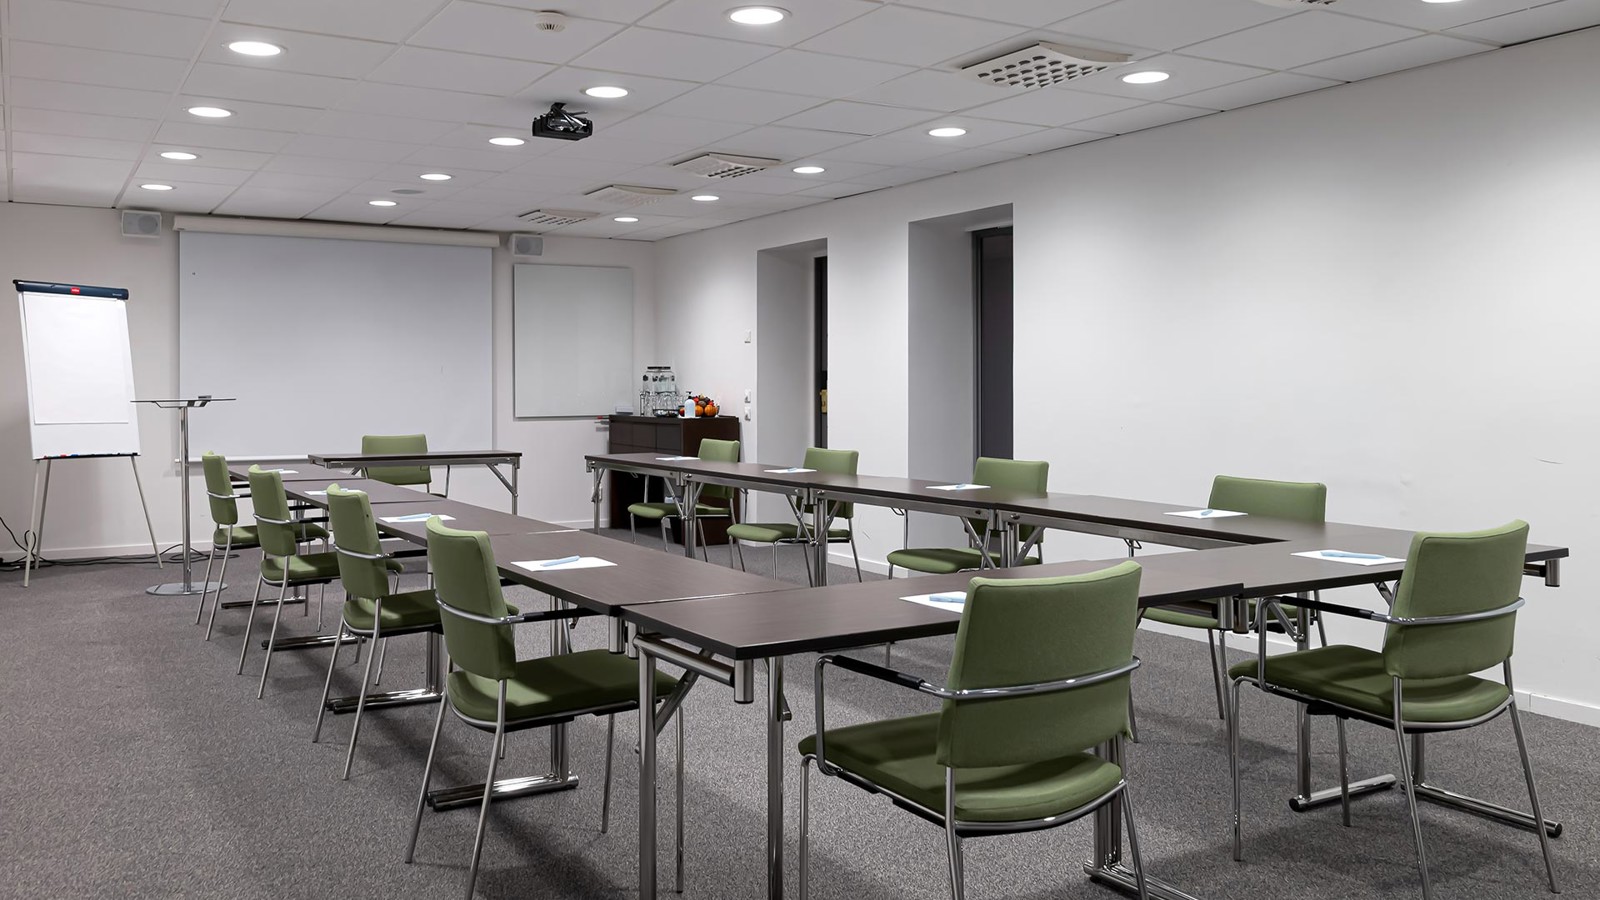 Conference room with green chairs